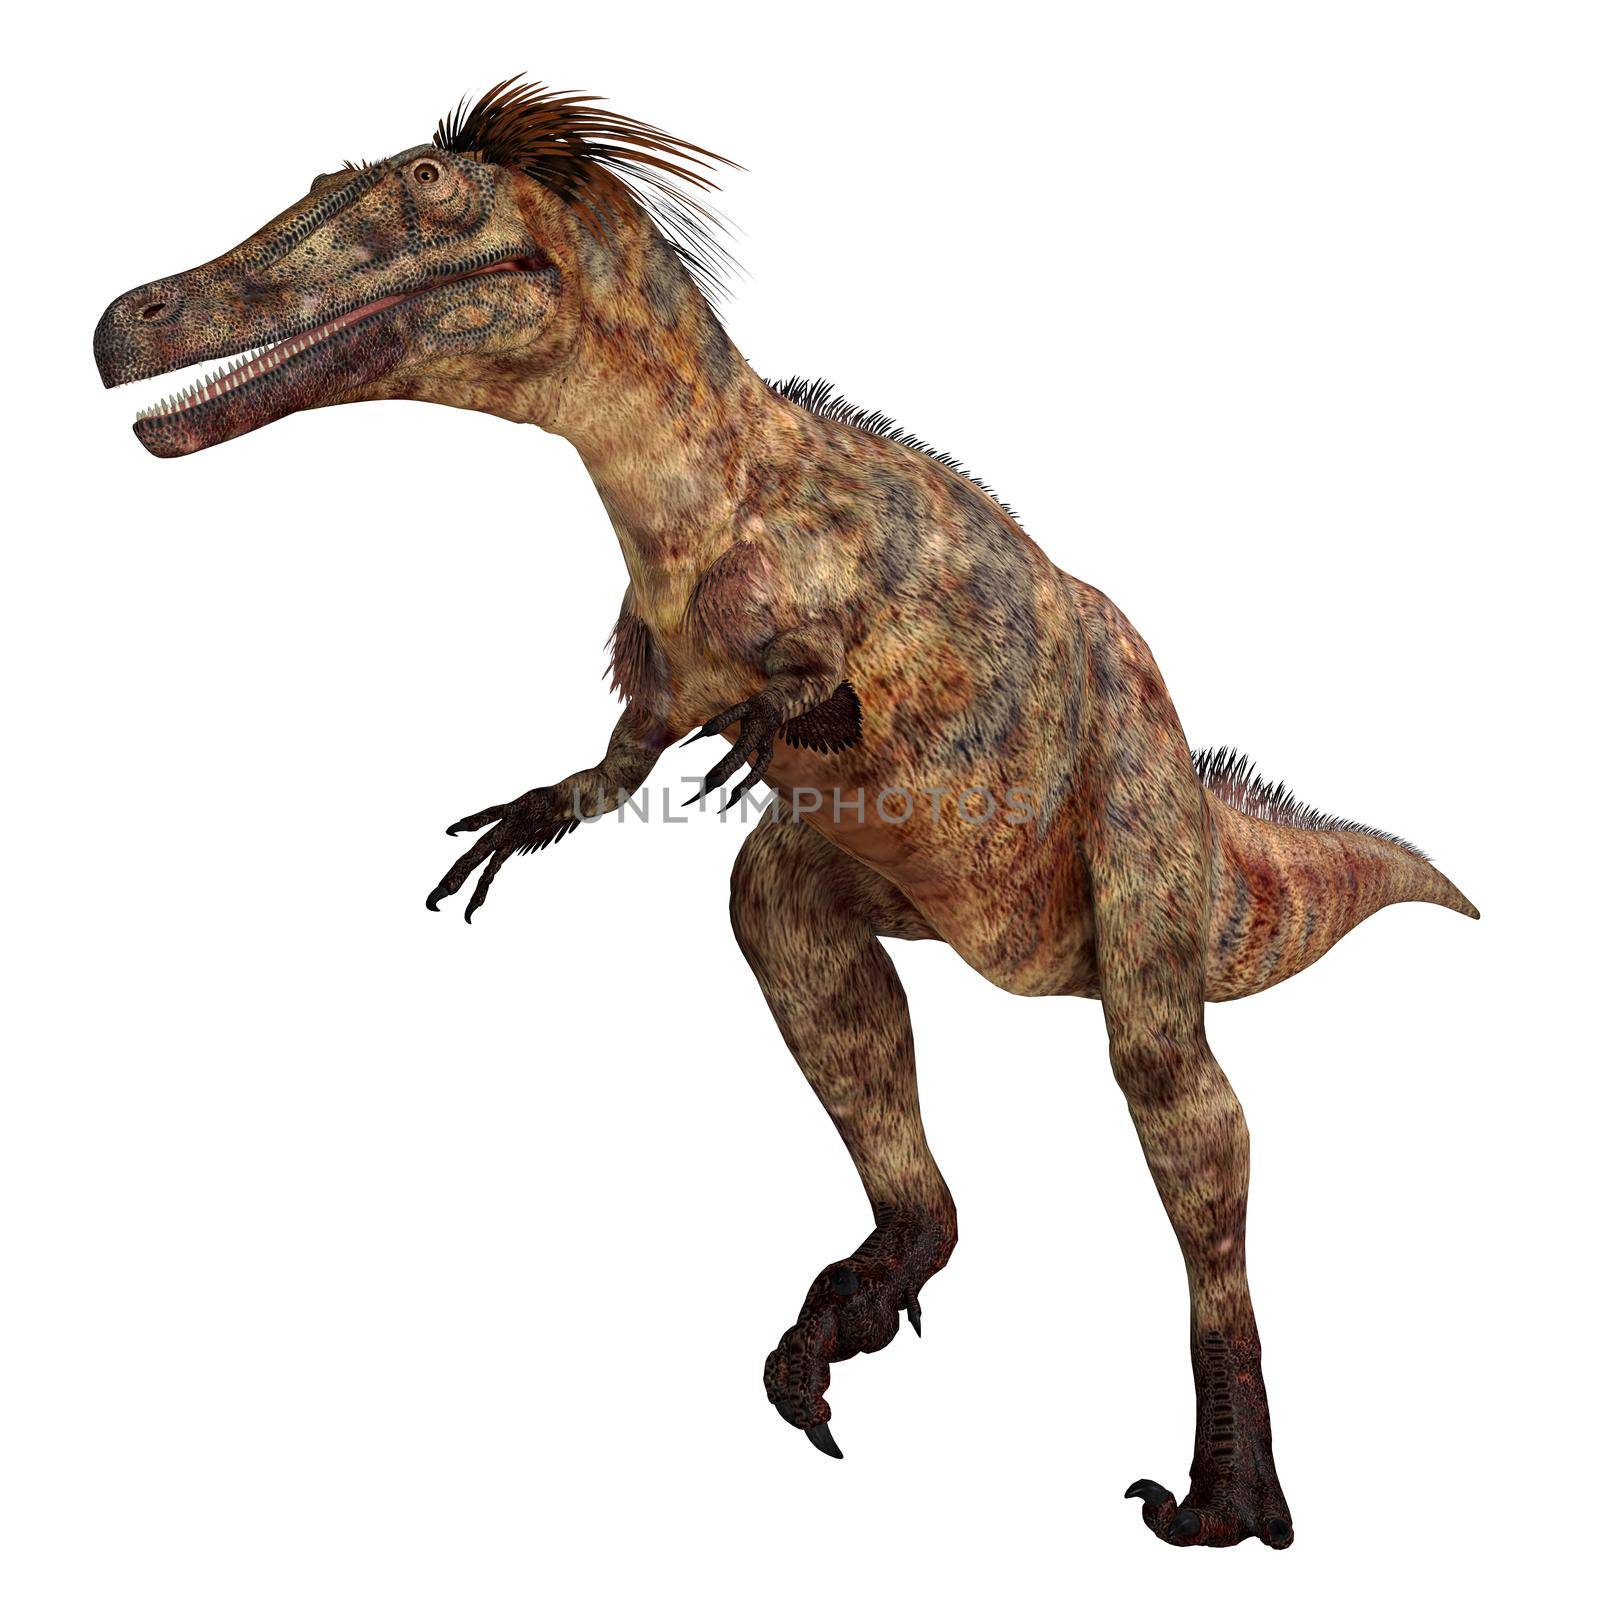 Austroraptor was a carnivorous theropod dinosaur that lived in Argentina during the Cretaceous Period.